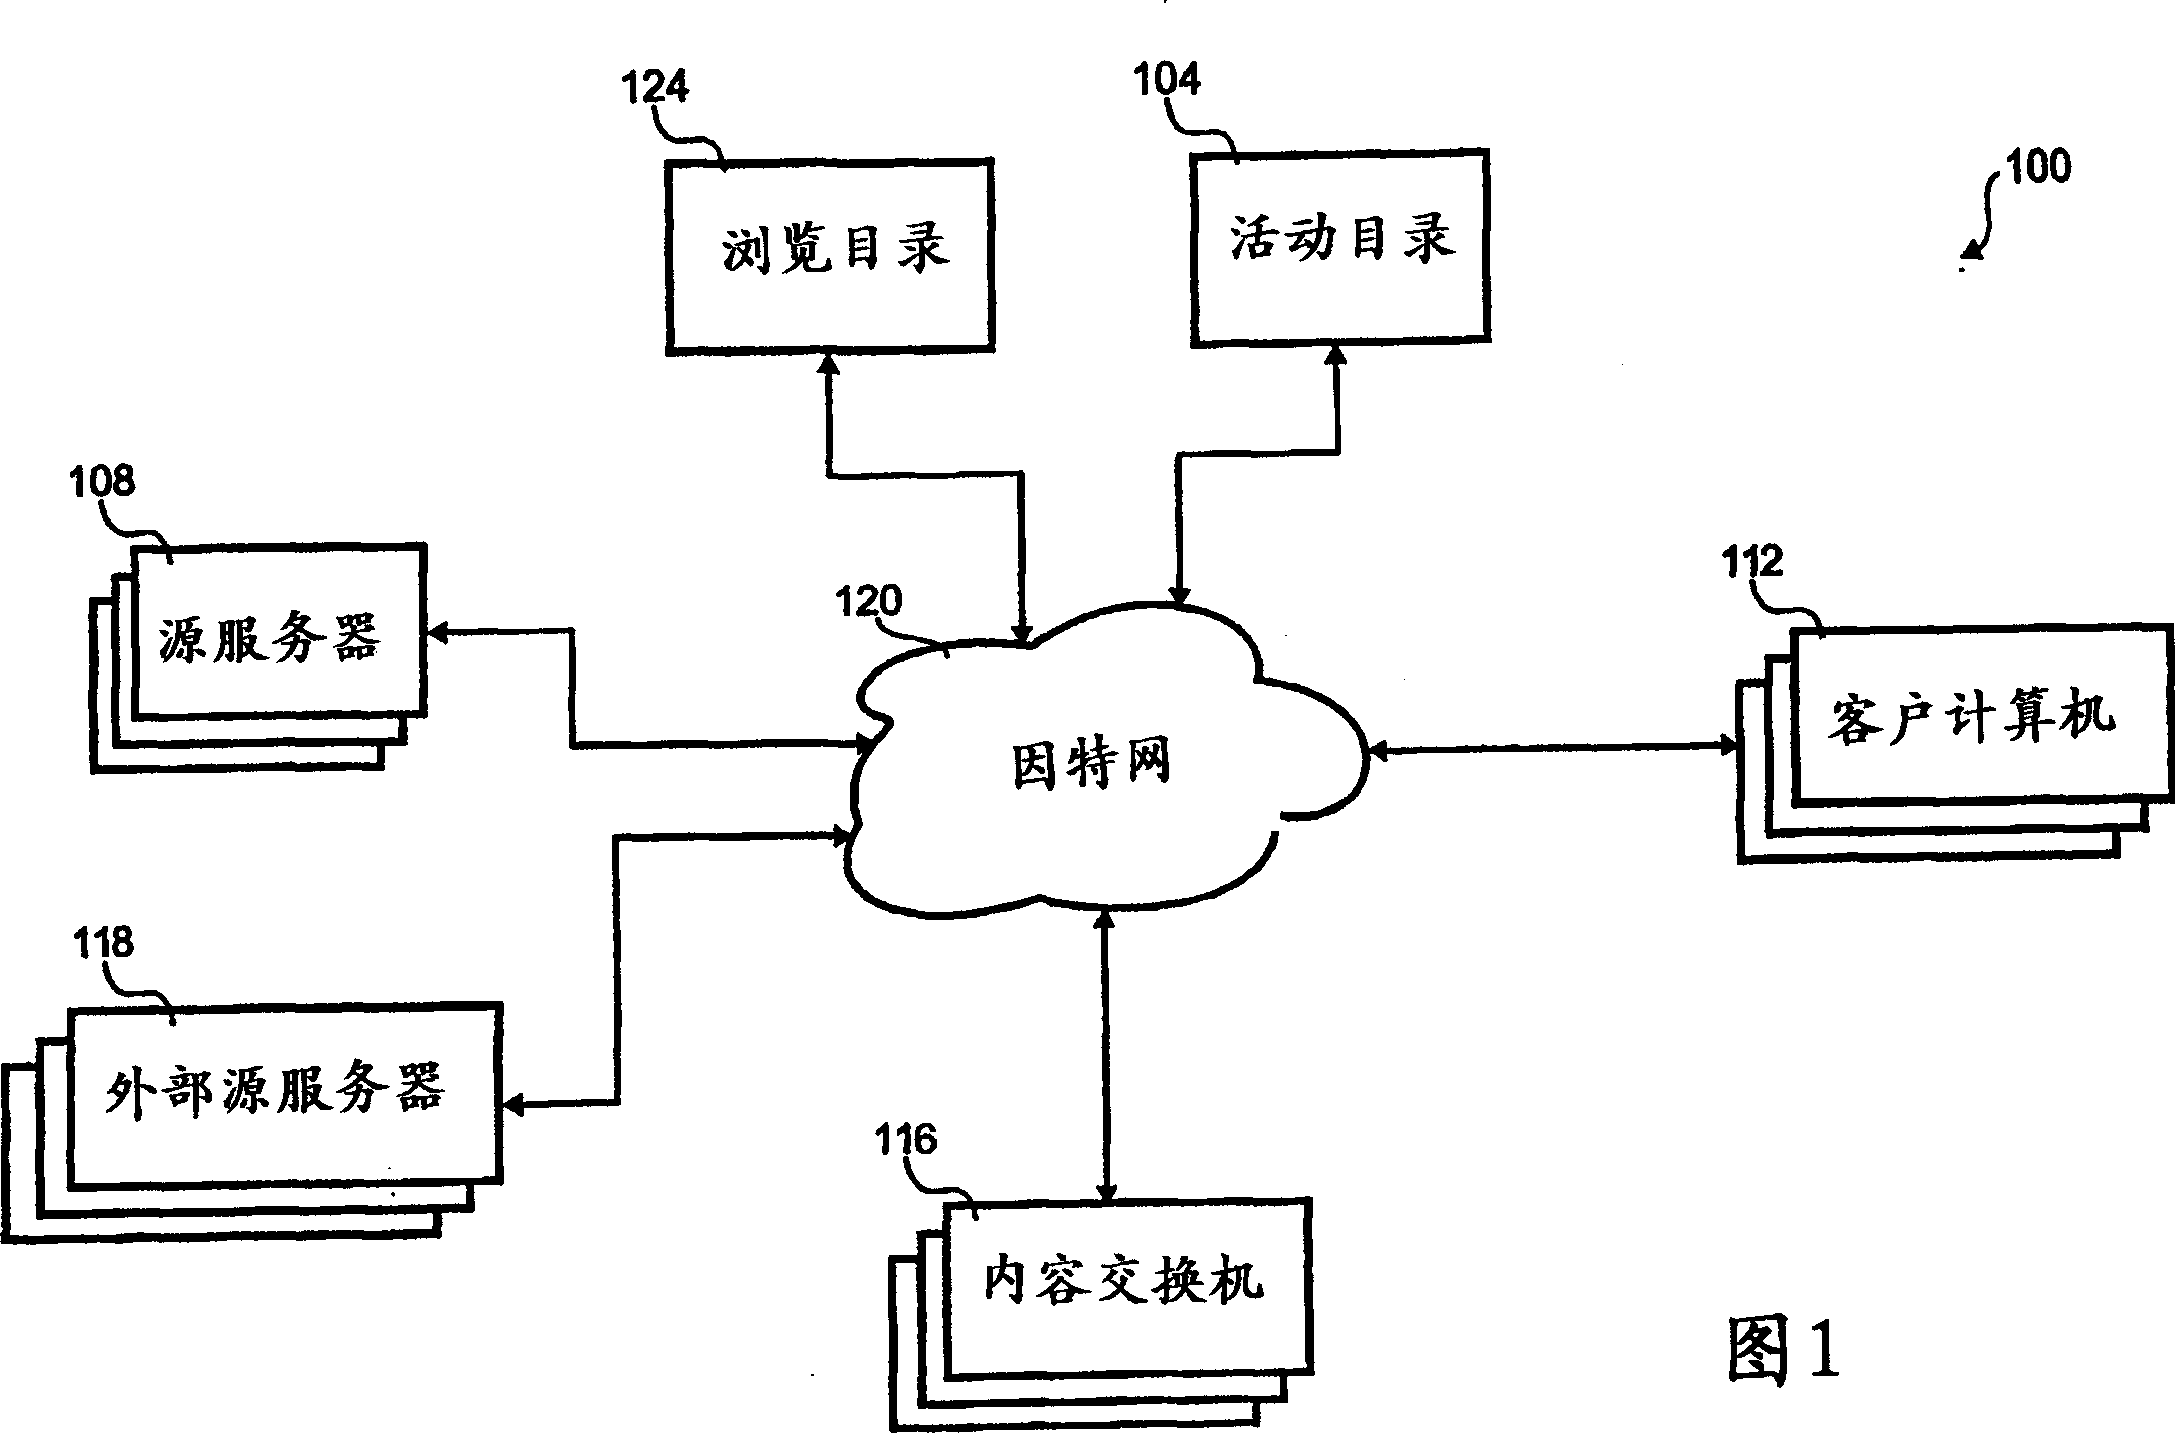 A QOS based content distribution network